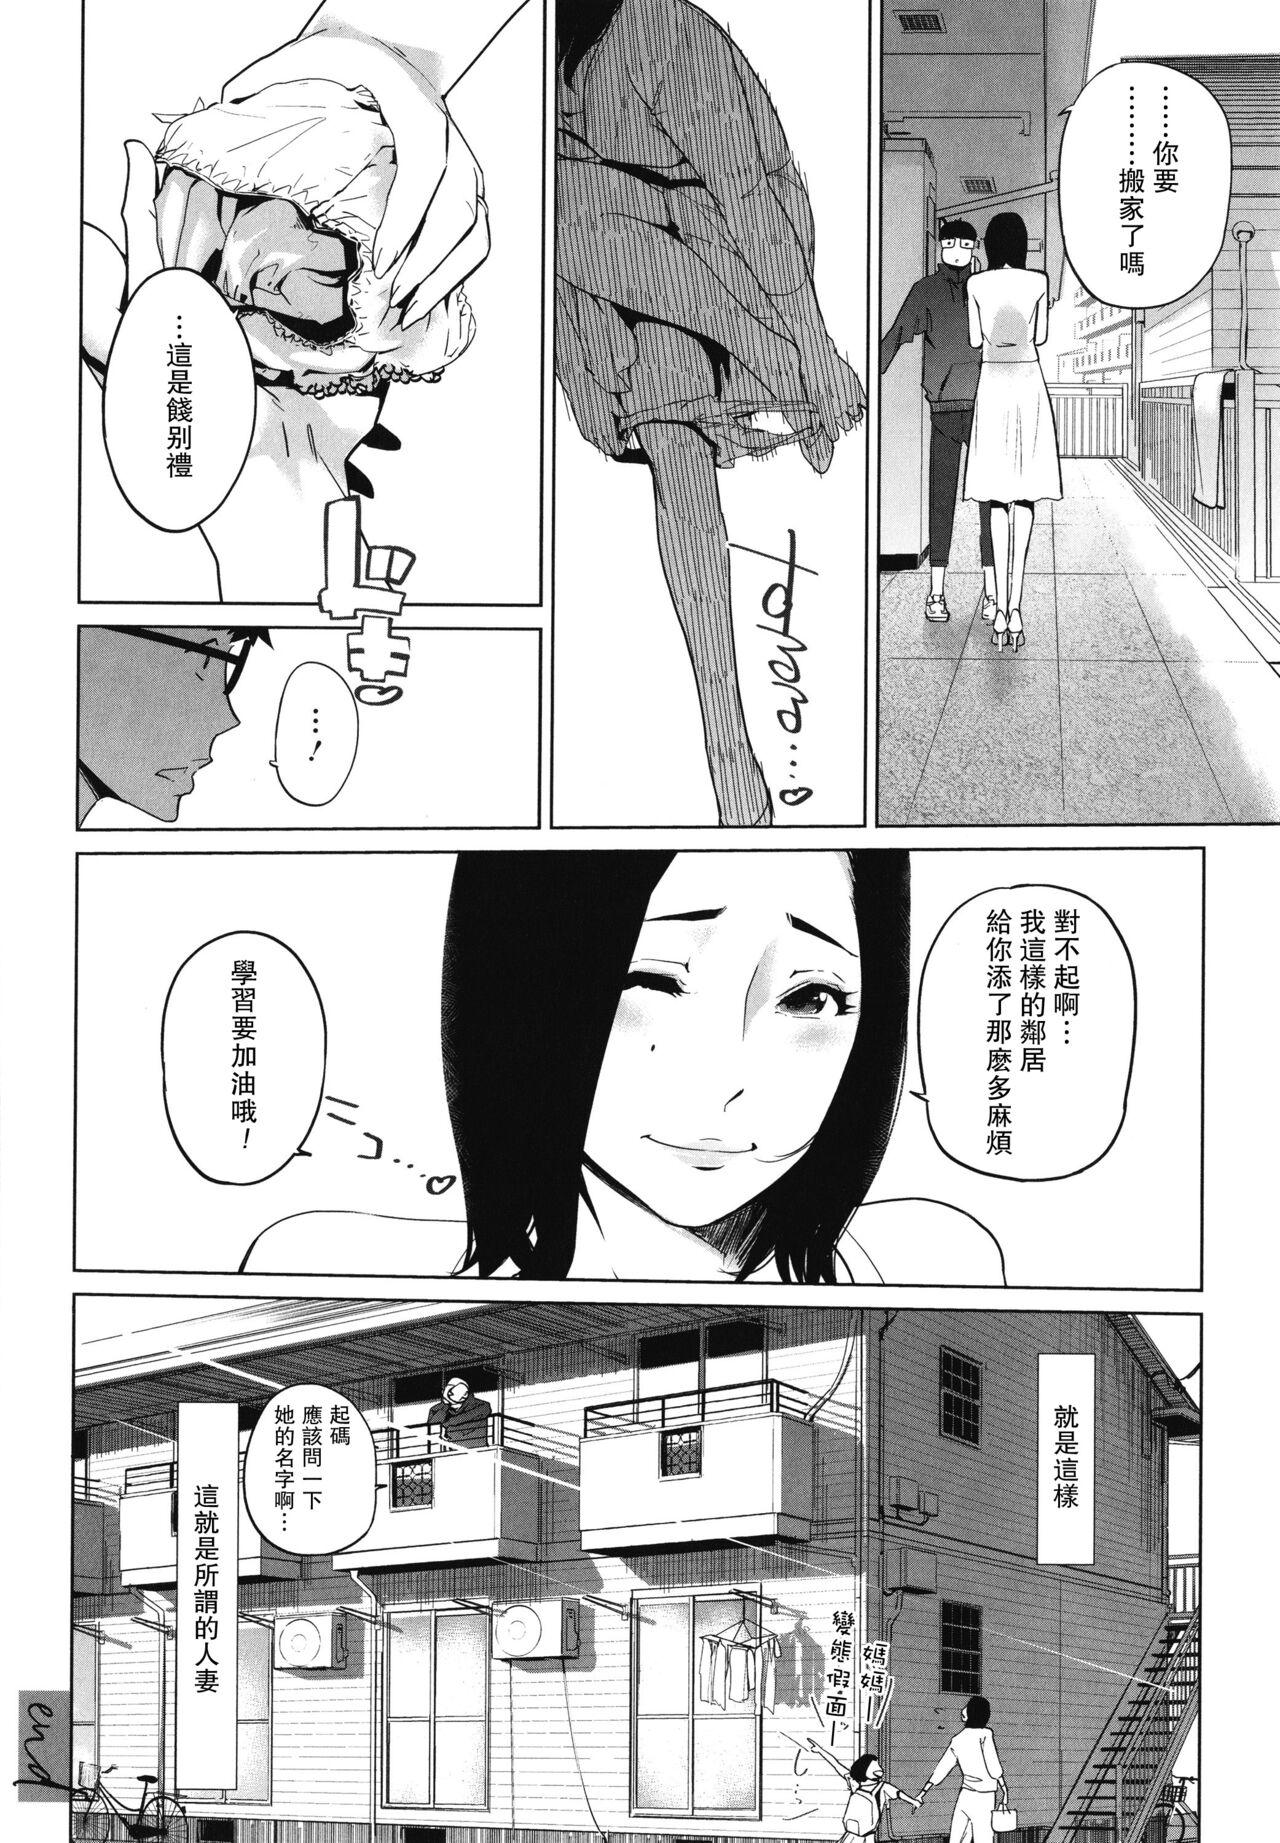 Pink 身ぎれいな女 Stepsiblings - Page 28